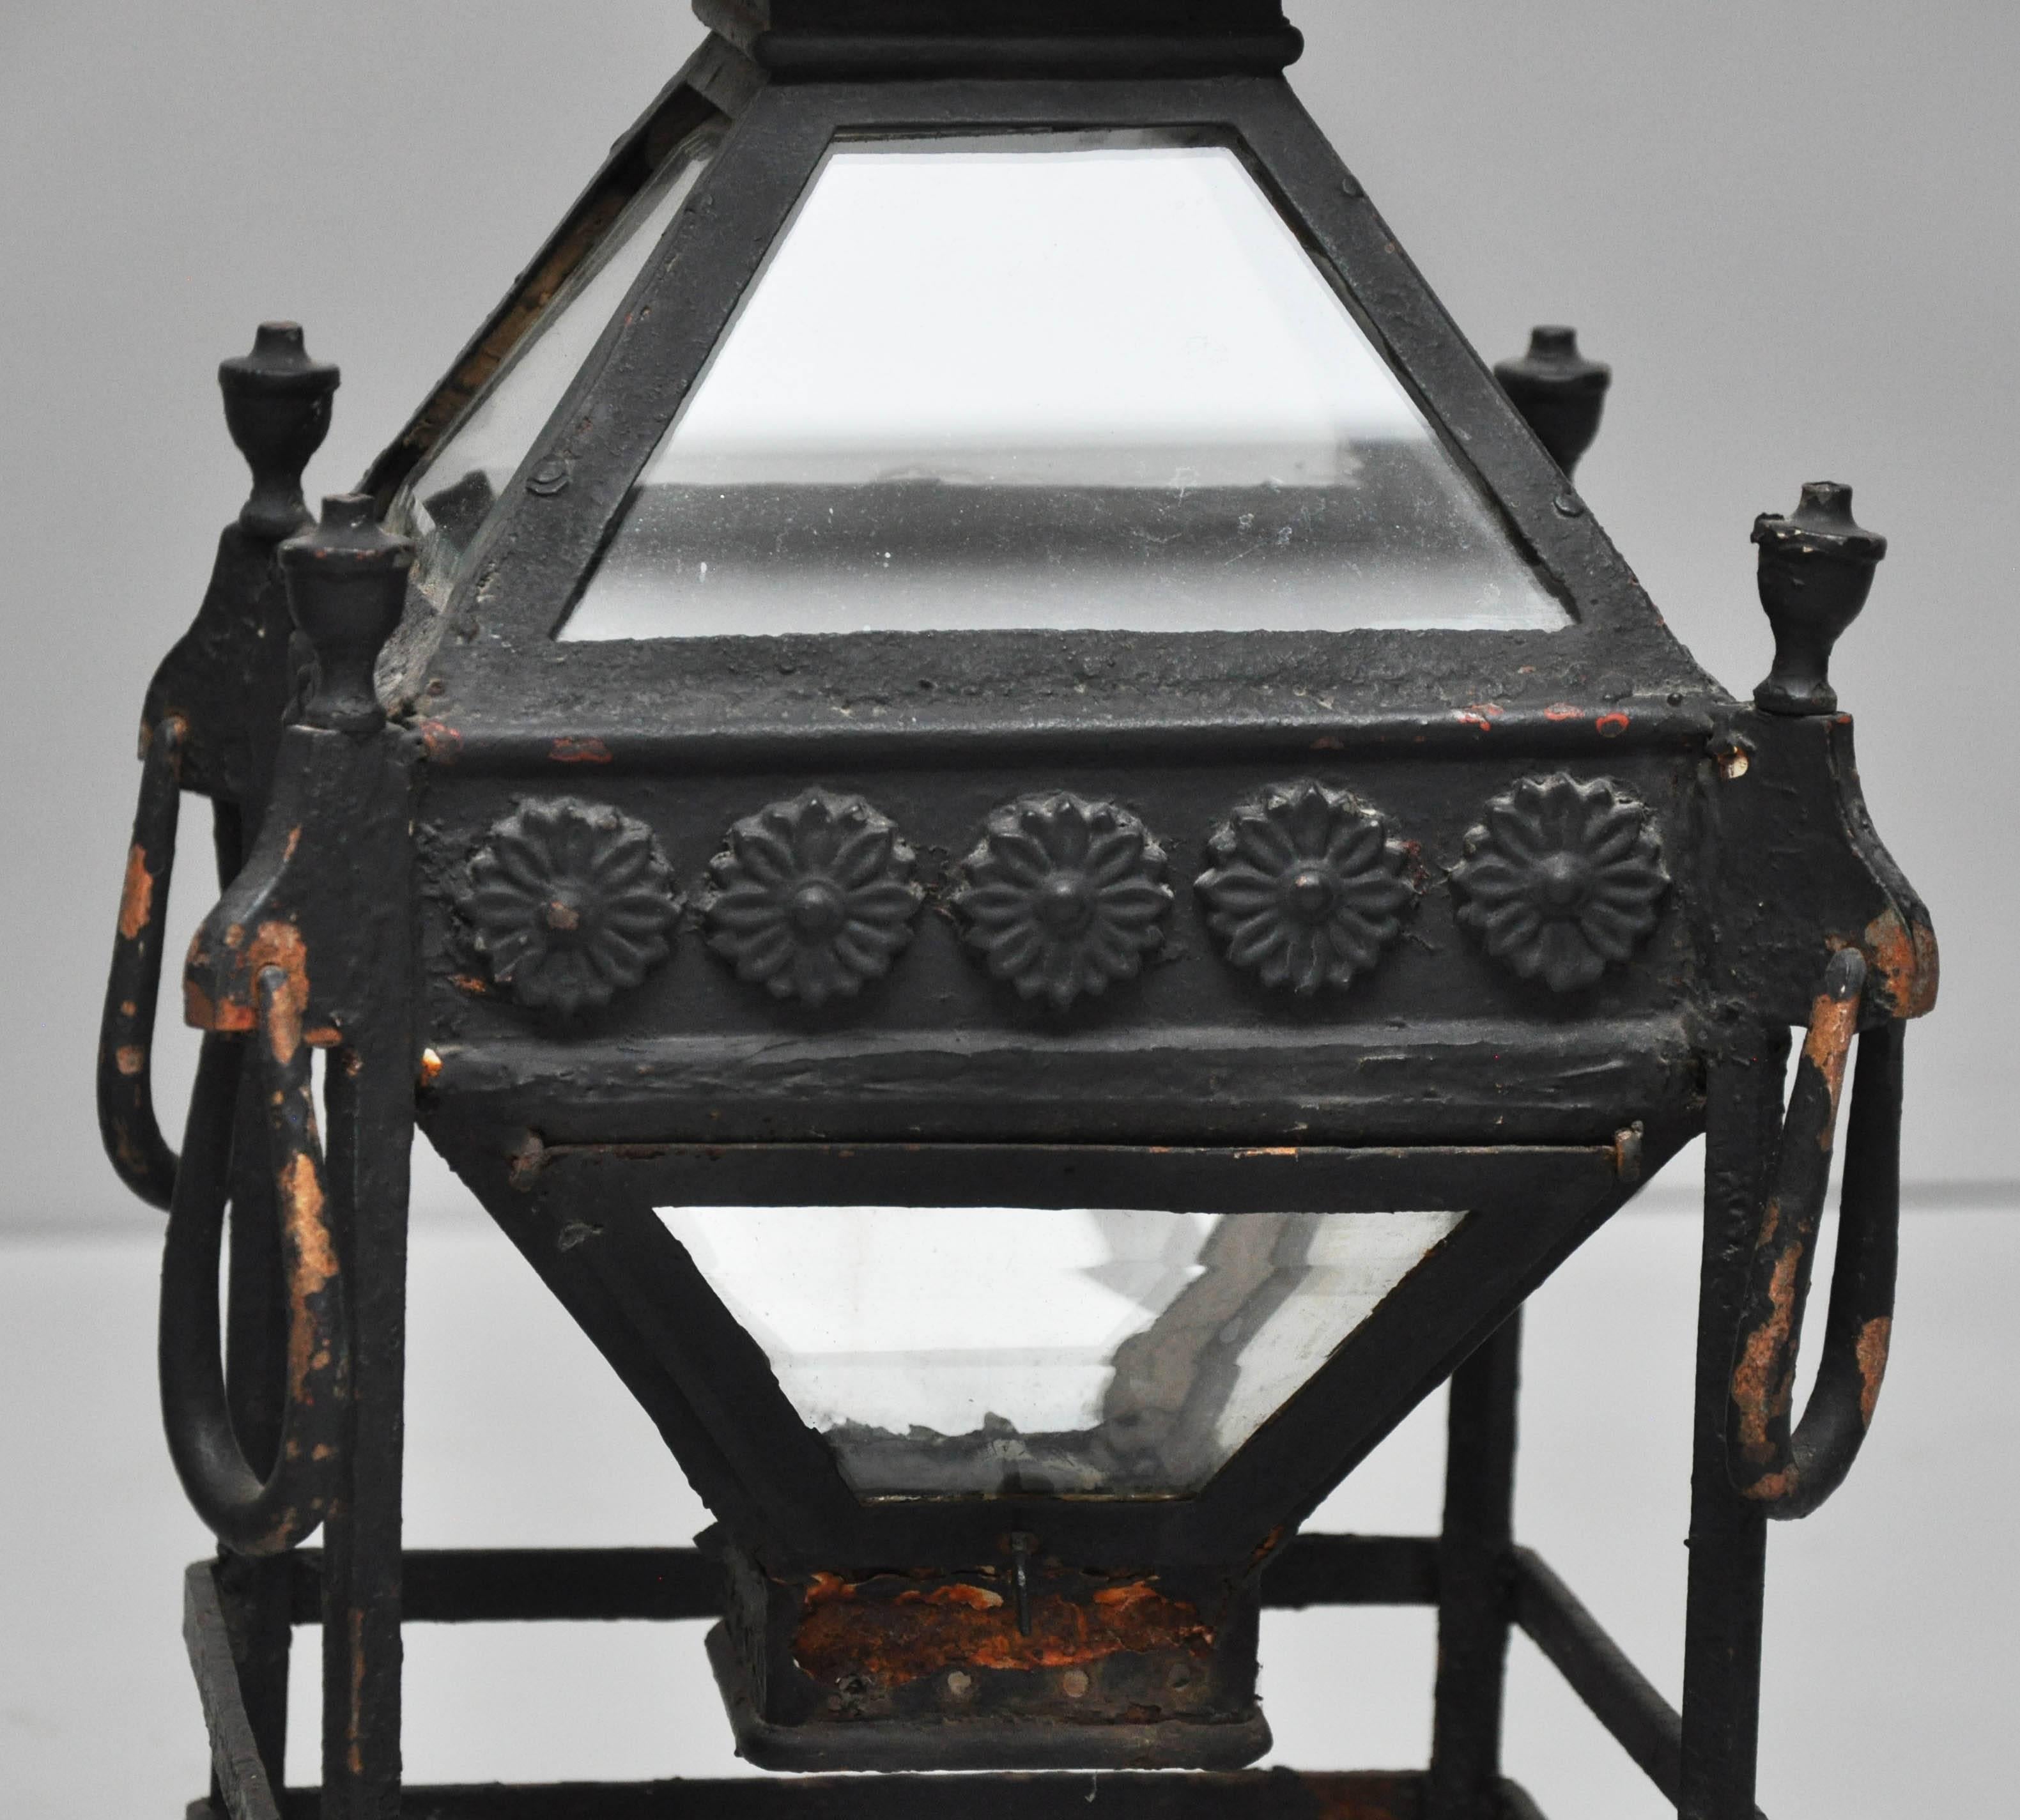 Pair of painted black iron and bronze pillar lanterns, square body in the shape of a pagoda, frieze with repeating flower head relief pattern, above polyhedral pyramid frame each side with beveled glass, surmounted by a four-sided flat pyramid cap,